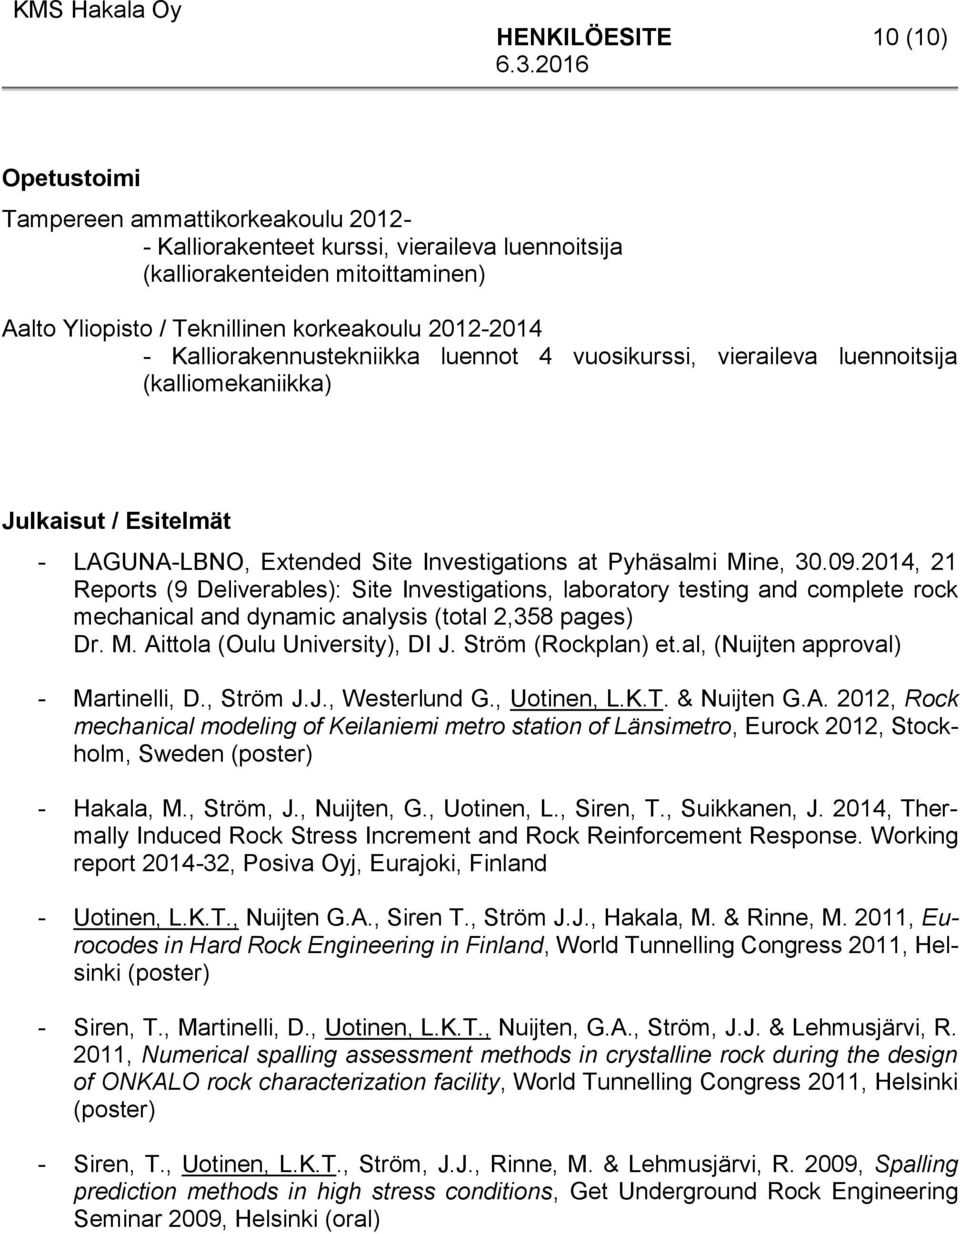 2014, 21 Reports (9 Deliverables): Site Investigations, laboratory testing and complete rock mechanical and dynamic analysis (total 2,358 pages) Dr. M. Aittola (Oulu University), DI J.